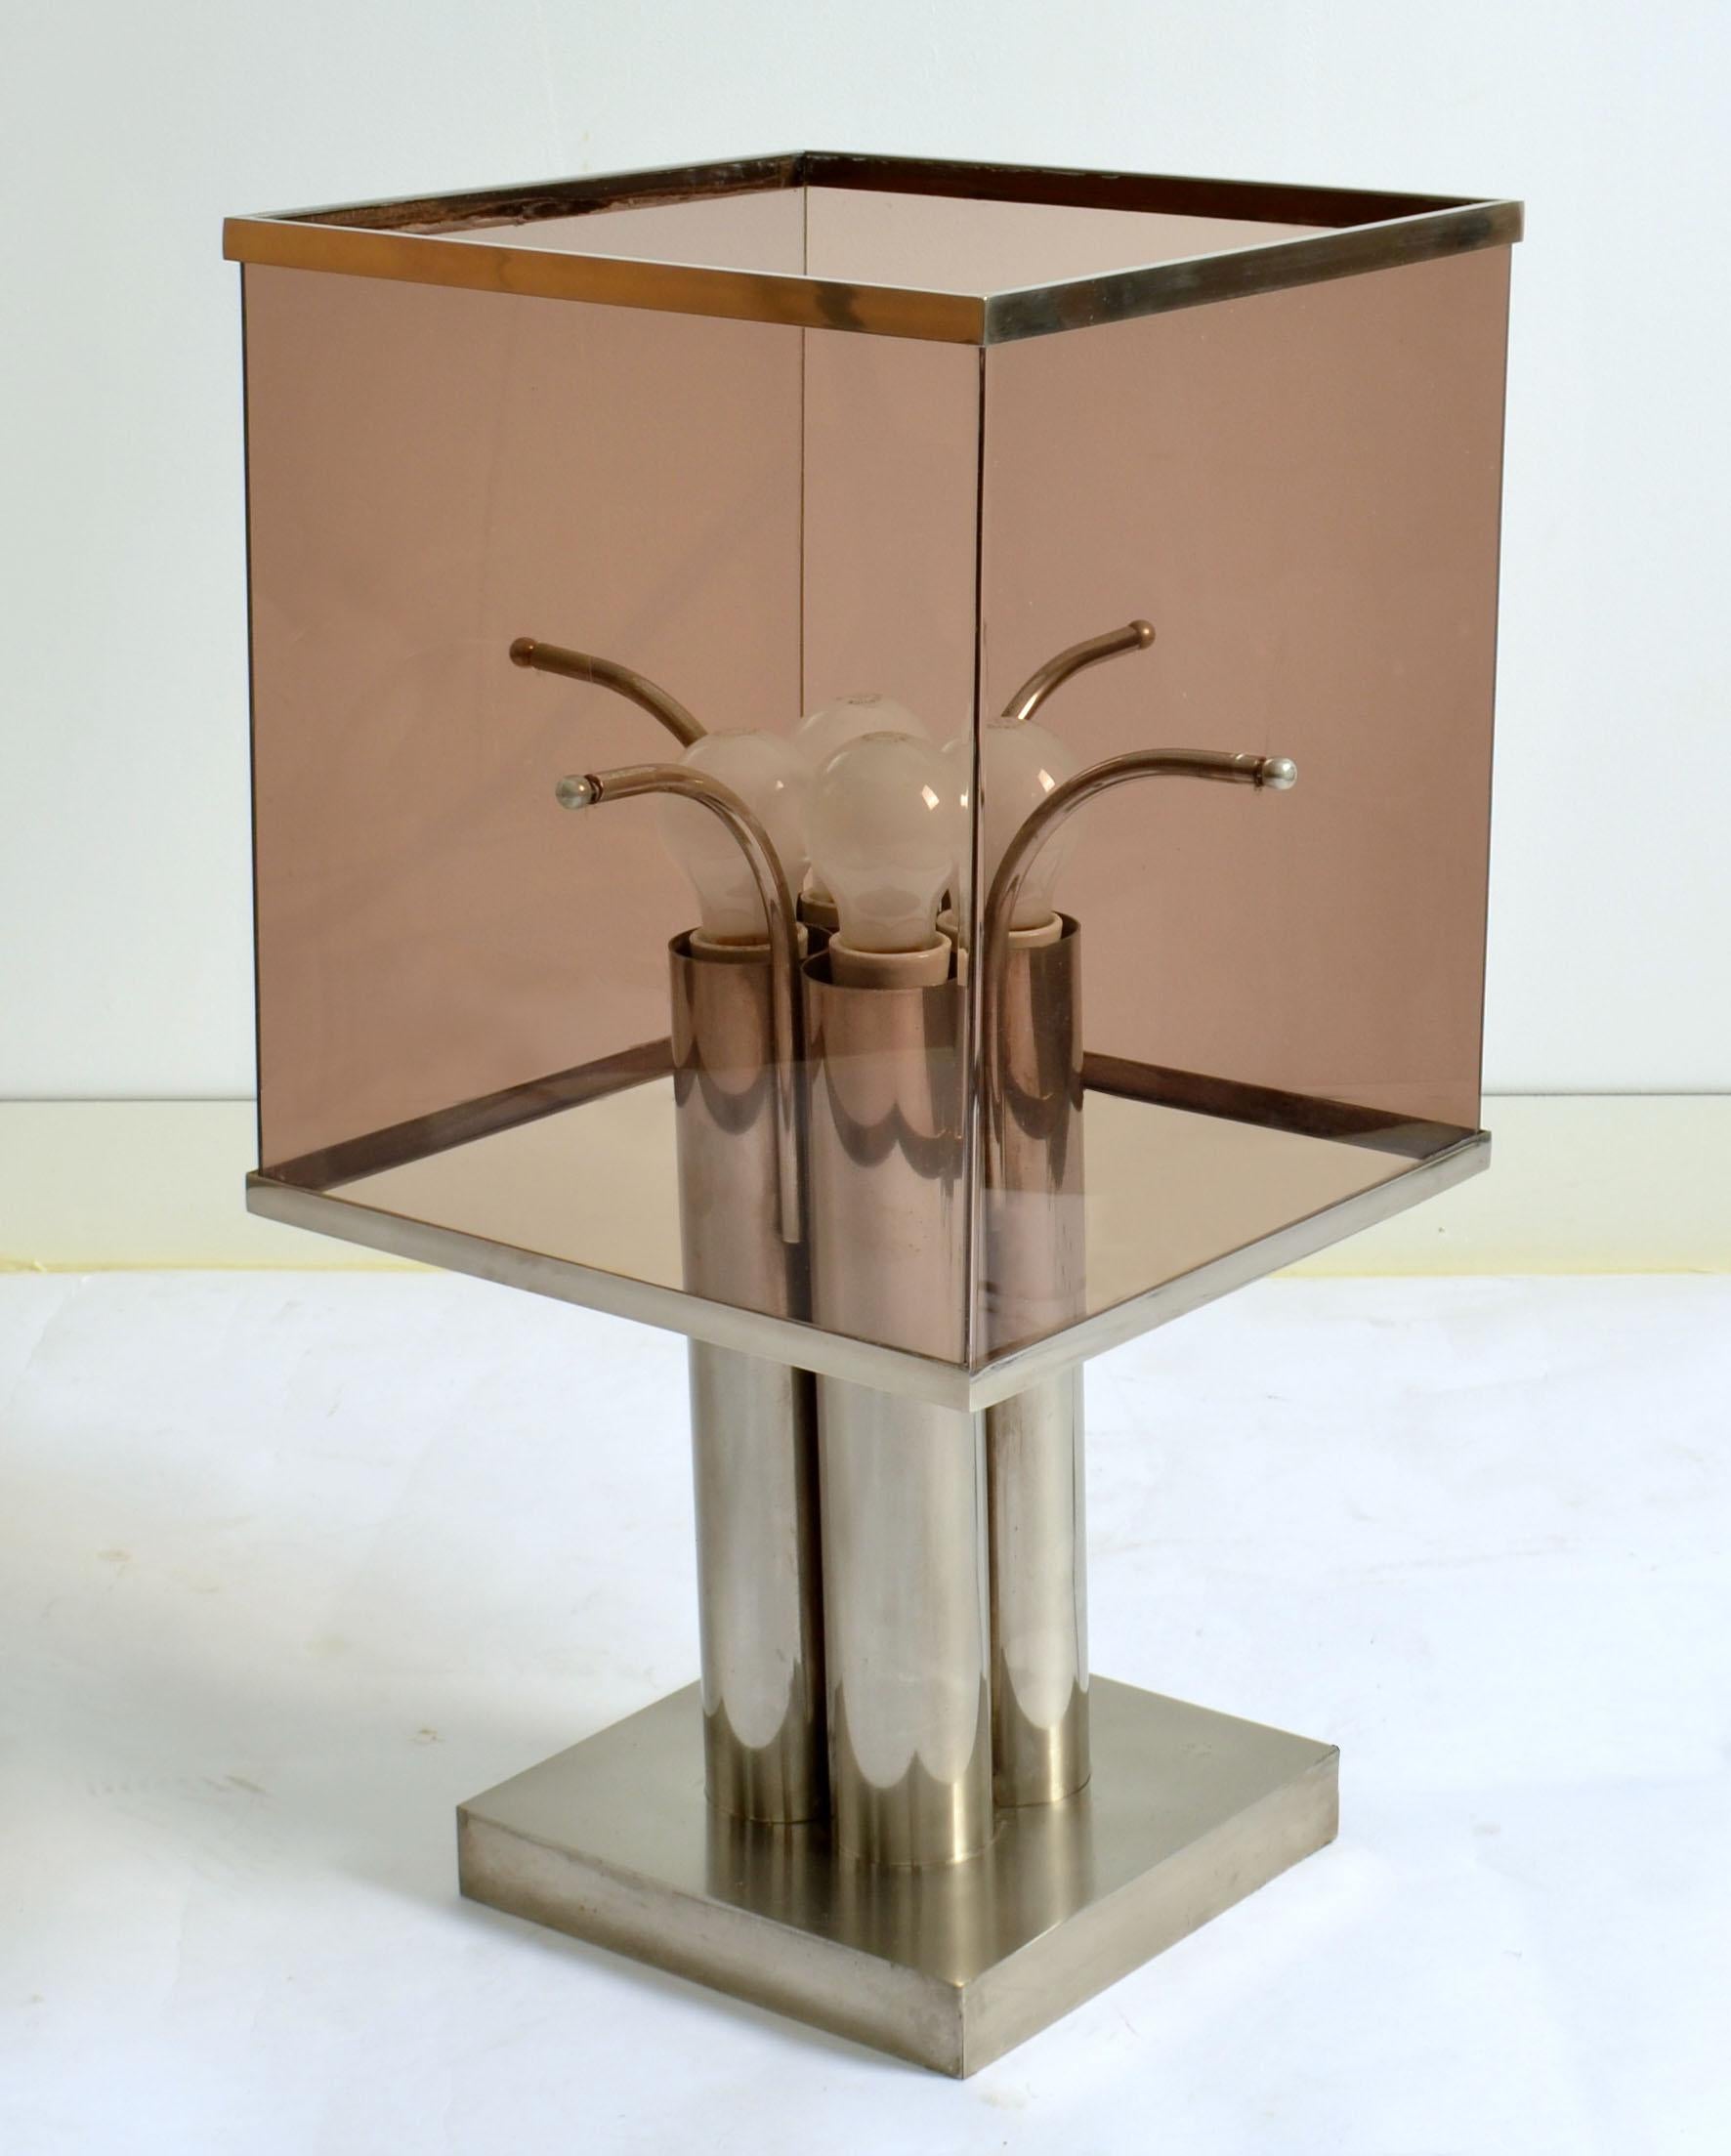 Pair of large sculptural Minimalist in nickel and dusty mauve Lucite table lamps by Romeo Rega, Italy 1960's. Structured base has four round pillars on a square base each holding a bulb. The square tinted Lucite shades are edged with chrome rims at